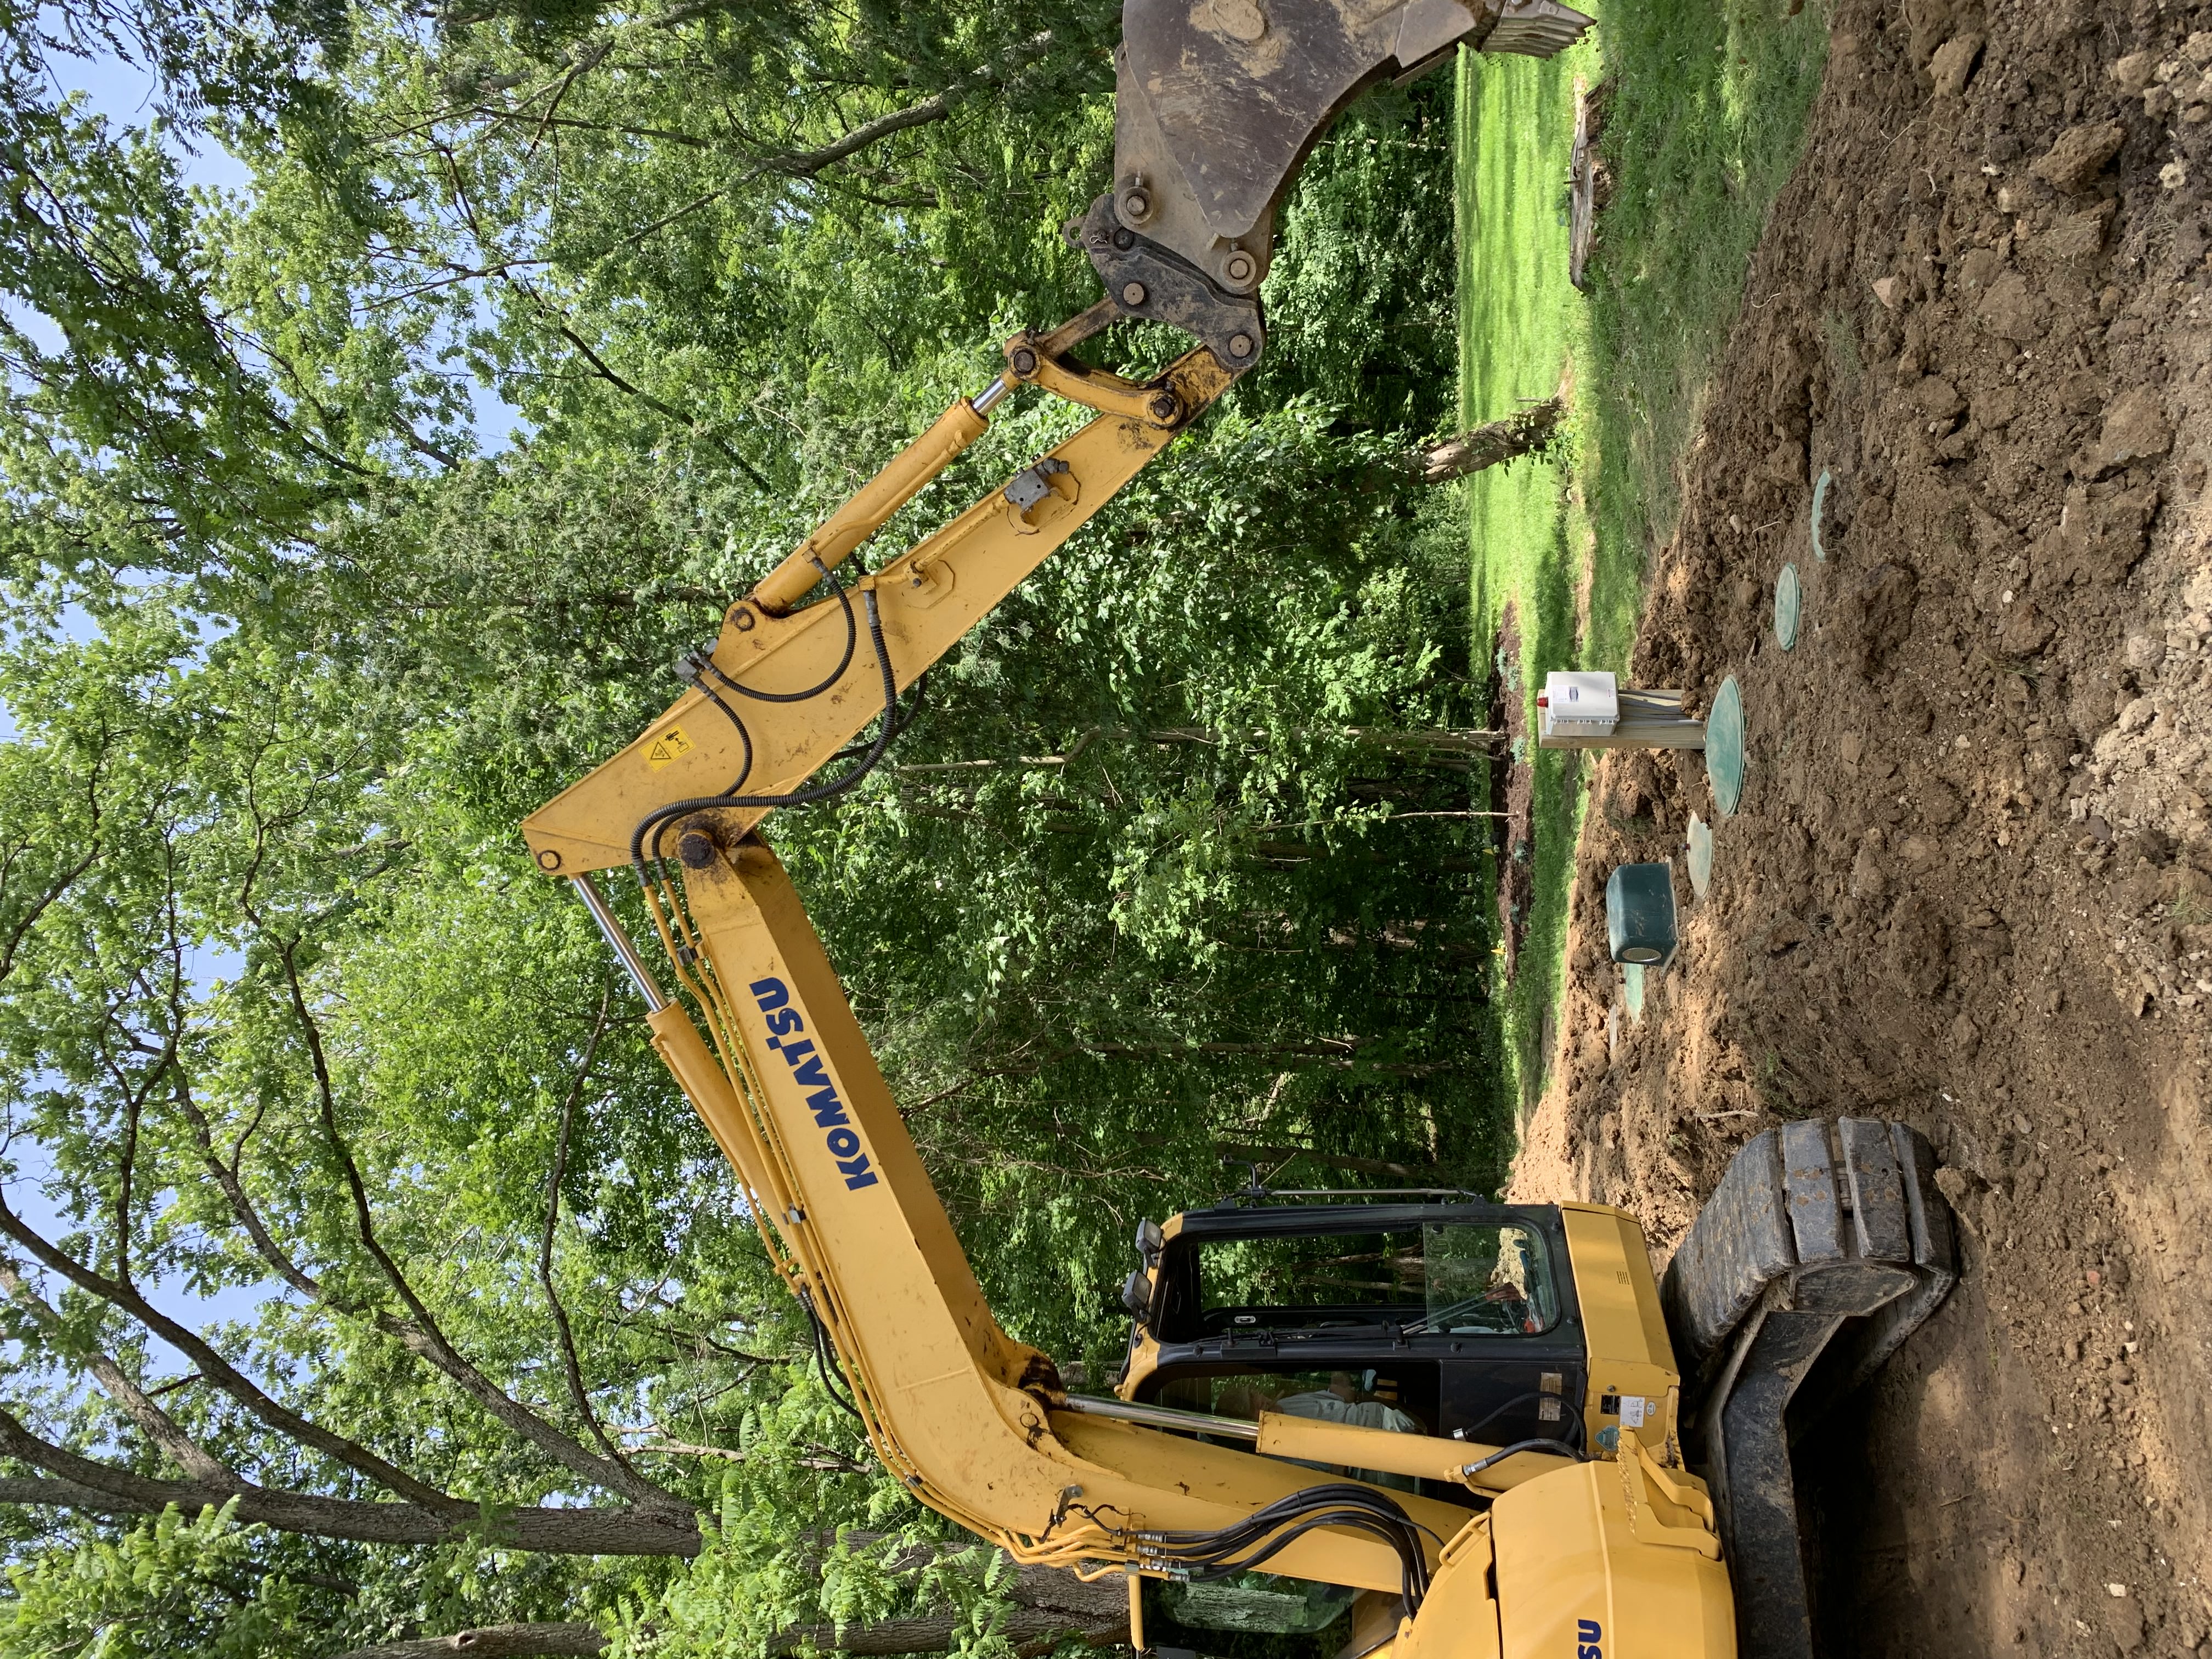 Professional Septic System Installation Services - Customized Solutions for Your Property